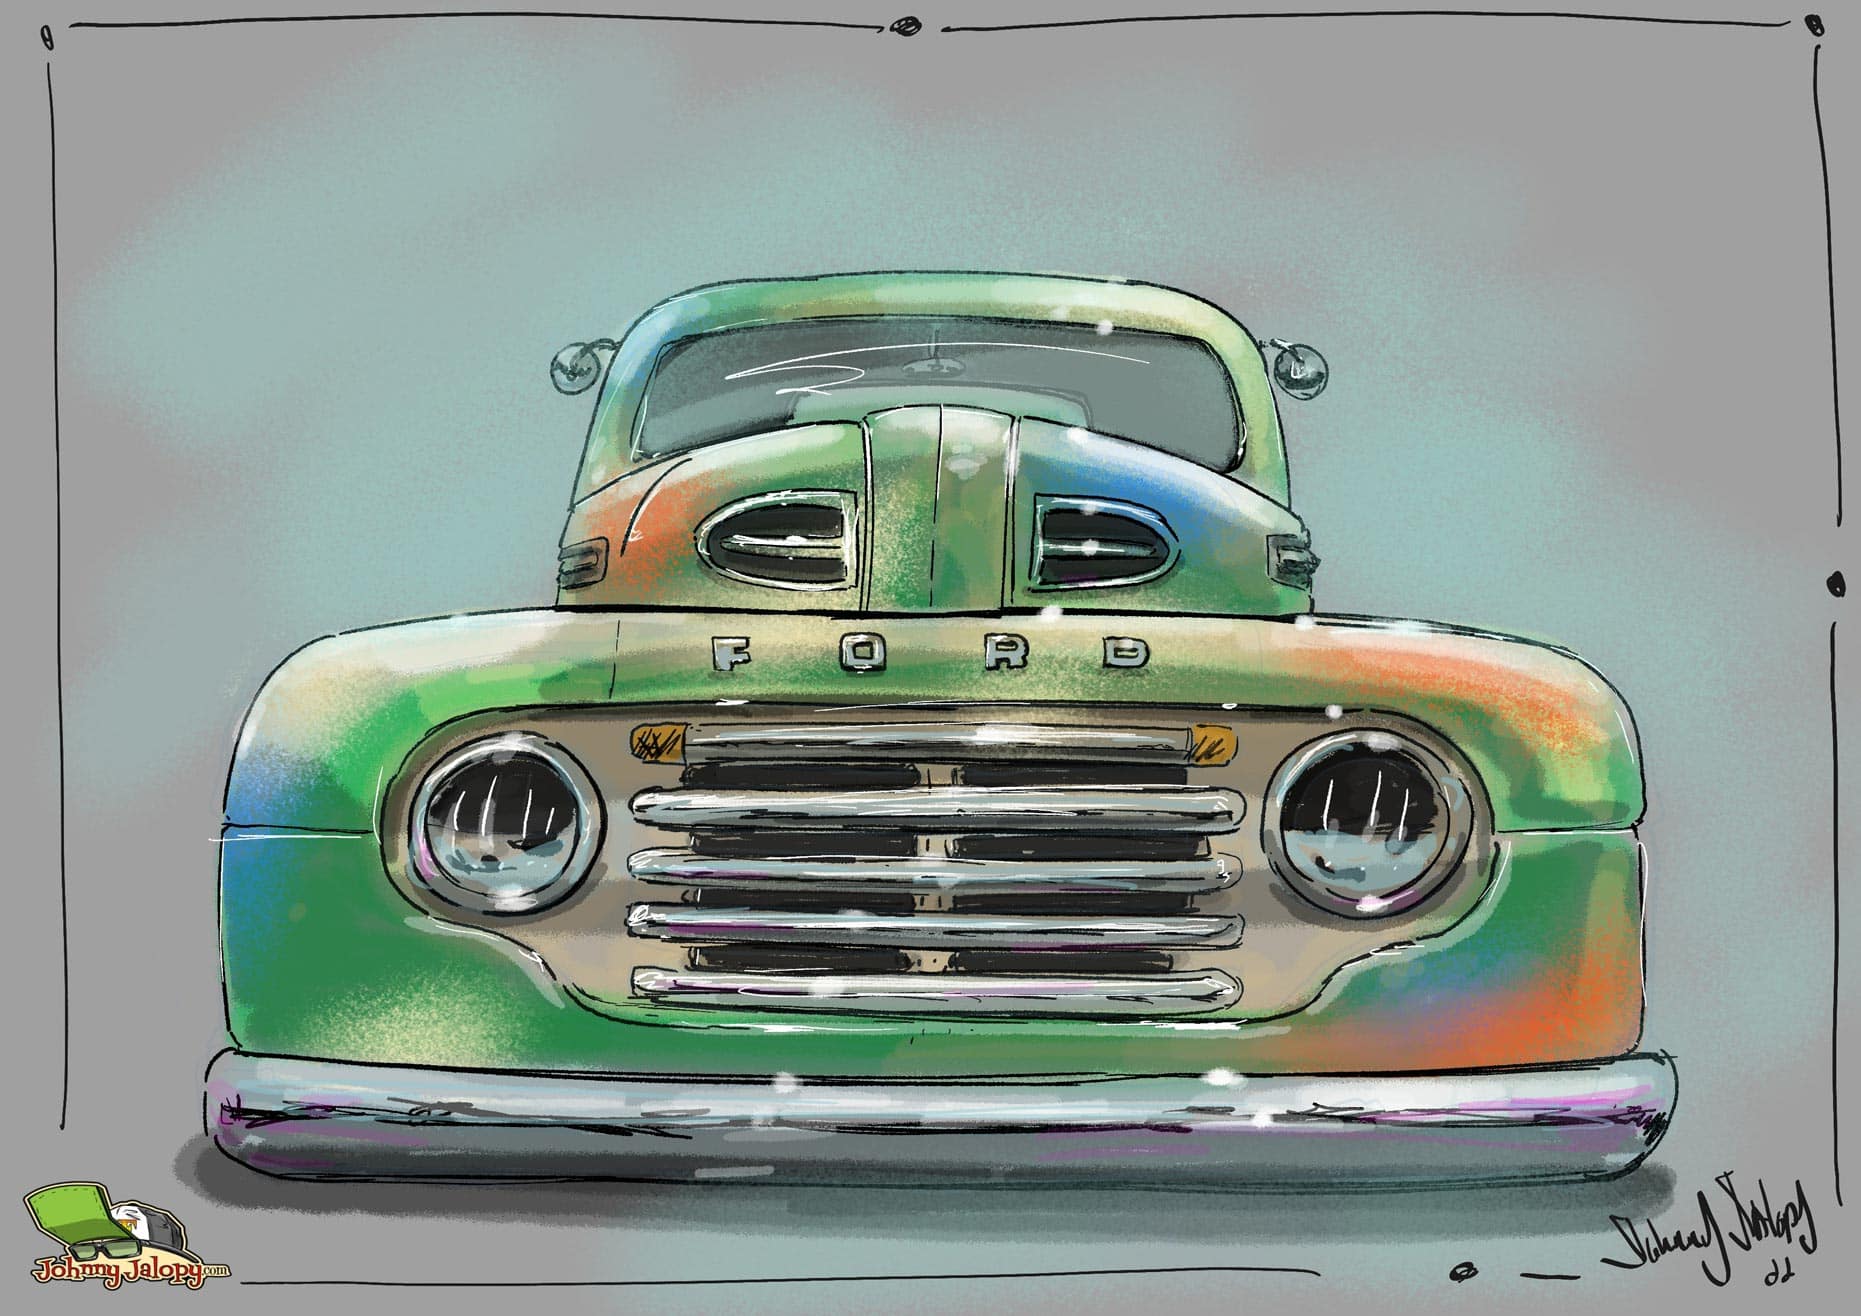 Johnny 5, Space Junkie, Funky Futura From Ventura, Flame Job, Number 5 Is Alive, Bobber Pal, On the Green, Simple Man, 36 Red Ride, 54 Chev Panal, 55 Gasser At night, Rat Mobile, blue tone extracab, 1978 GMC Toon Sepa, Aloha Dave, Army, Art On Wood, Babe, Eye Guy Bagger, Bandit, Beatnik Bandit, Take a knee, Black Brown 57 Chevy, Black Singal Cab Surf, Bo Huff Tribute, Bo Huff T, Board Tracker, Bobber Toon, Bubble Concepts, Still Plays With Bubbles, Orange Two tone bug, Baby Blue Bug, Bug Red, The Hold up Buick, Buick City, Caddy, 70 Camaro, CCab, COE Kid Jalopy Truck, Chopper B/W, Chop Shop Van, Chopped Custom pink, For Certain T, Flying Eye Chopper, Chopper Dude, Chopped VW Gray, City Run, c10 gray, Color Motion, The VW Hang Out, Concept Bubble top, Custom cruiser Bubble Top, Corvair Surfs Up, Corvanning, Minty Fresh Buggy, Stung, Lets GO!, Da Weeds, Inline is fine!, Crazy Rails, lucky 7, Buggy Fun, Red Wings, Evil Drag New Color Crazy, Eye Guy bucket, his EYE is on YOU!, Made In, Frosty VW, Five Window Surf, Showing Scars Surf Rod, Flying A, Later!, Up high, Frankie in da Bucket, Frankie Hard, Franky Big T, Frantic Final Driver, Full Color Print, Garage 1, Garage A, Gas Bubble, Gas Up, Gold Nugget, Gray Grill, Green City Speeder, Green Light, Half And Half, Hang Lose, Harly Bobber, Hauling Bucket, Home Brew TShort, Hrwc, Insecurity, Jalopy Wiskey Truck, Jalopy Hooker, Jimmy Fishbone, JJ Monster, Kid Jalopy, Kid Jalopy Farlane, Kid Jalopy Fleetline, Kid Jalopy Rockhell Sidekick, patina blue bug, rusty patina volksrod, Gray A, White Impala, Let's roll, Black Beauty, lost and found, lowtide guy, mahalo hut, mahuling, Model A Gray, Mustang Bill, Purple  Elco, Ghia, Red Rum, Surf Bucket, Volksrods rock, Who's Next, old skate dude, old time, on fire!, Orange T, Orange bobber kool, PBR, Polo Loco, Rail job fire, rat bug flying, primer volksrod, Traditional Rat, Rattastic, Ruby Dub, Red convertible, red rat bike, Teal time, ripping it up, Rixshaw, Rock Star, The Rod punk, Roth hauler, rowe, Royal Purple, Sepa Zepher, Side Car, skate dude black, skate dude surf truck, skeleton rider, skull rider, Red Sled, slunglow, das Volksrod, Space junkie toon, space junkie II concept, space rod, spike, notchback toon, stripper, surf deluxe, surf brother, tiki bus, surf bum, pearl gold, Zombie squad, surf fink, Red Ford, teal surf ford, surf freak, surf internatinal, surf is up, surf n dude, surf rods, Blue Pencil T, surf wax, T bucket yellow, the belly, the driver, The Drive